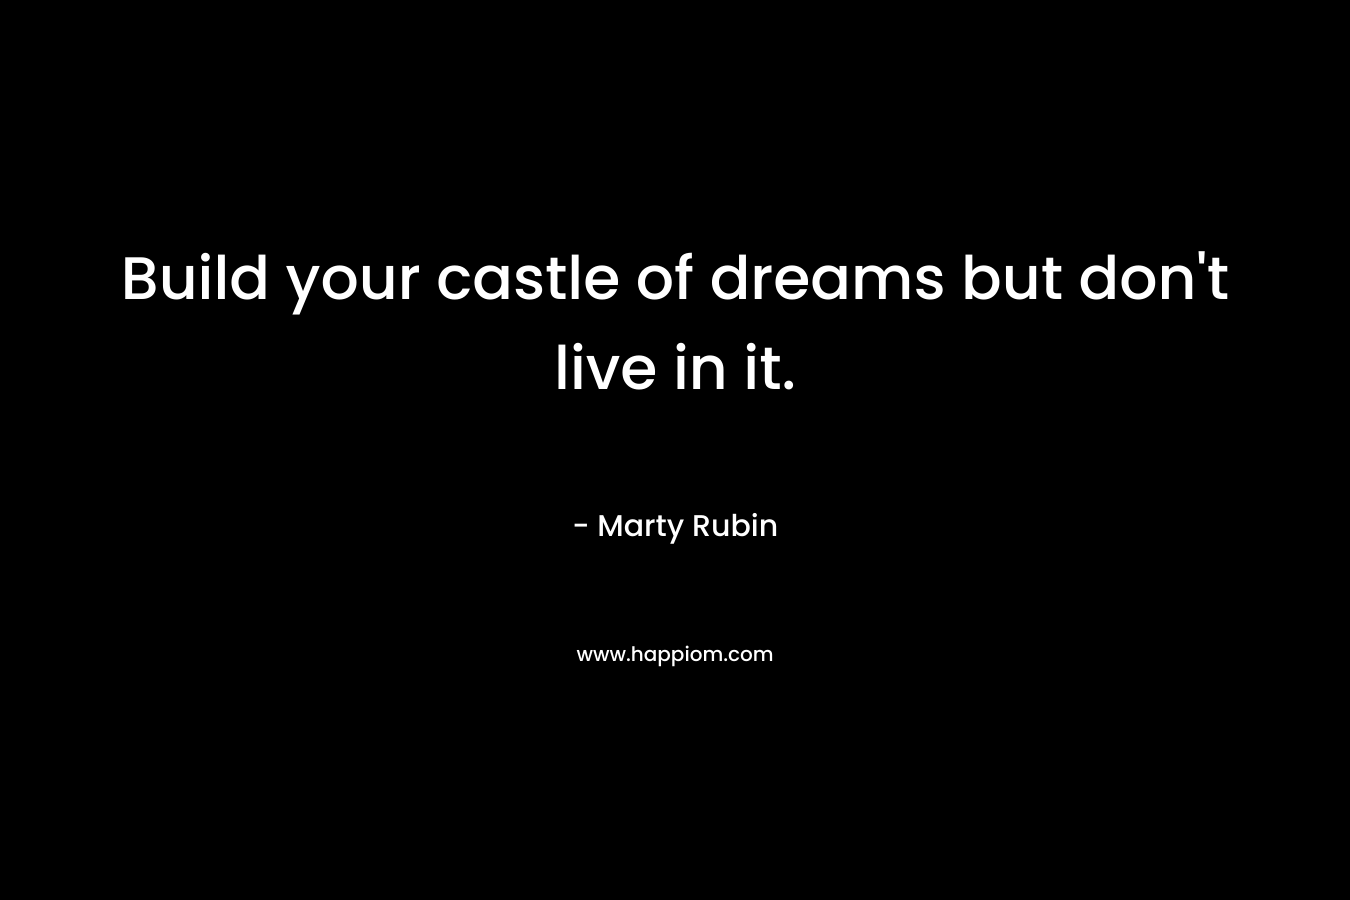 Build your castle of dreams but don't live in it.